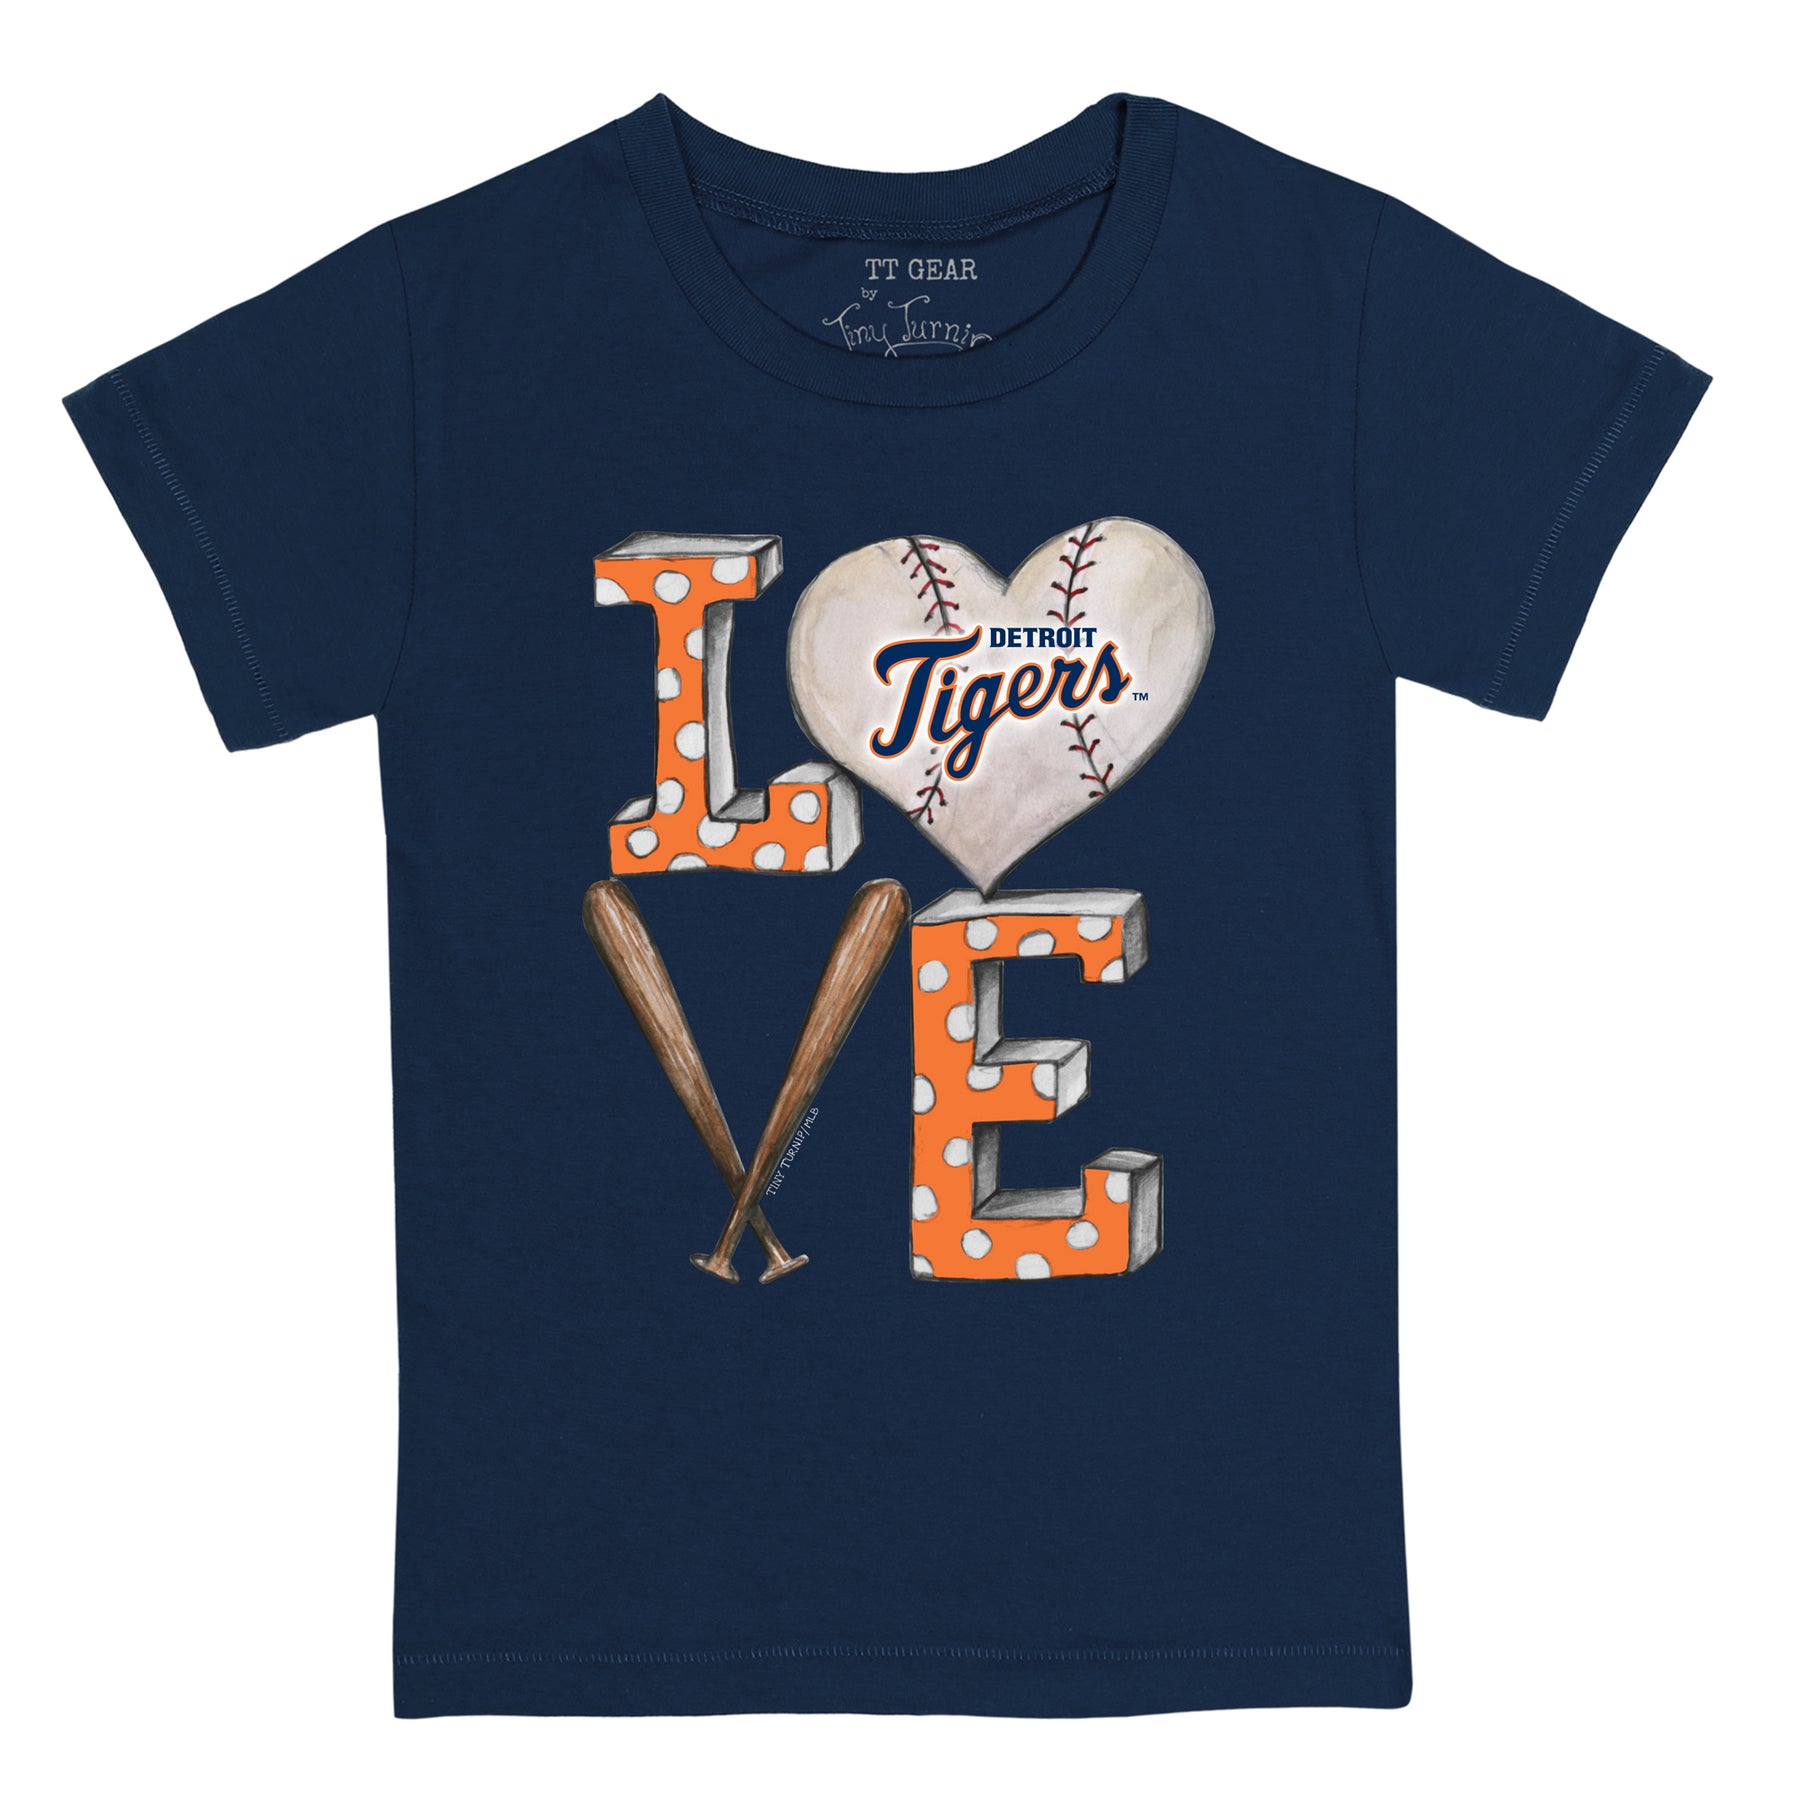 Detroit Tigers outfit. For my mommy.